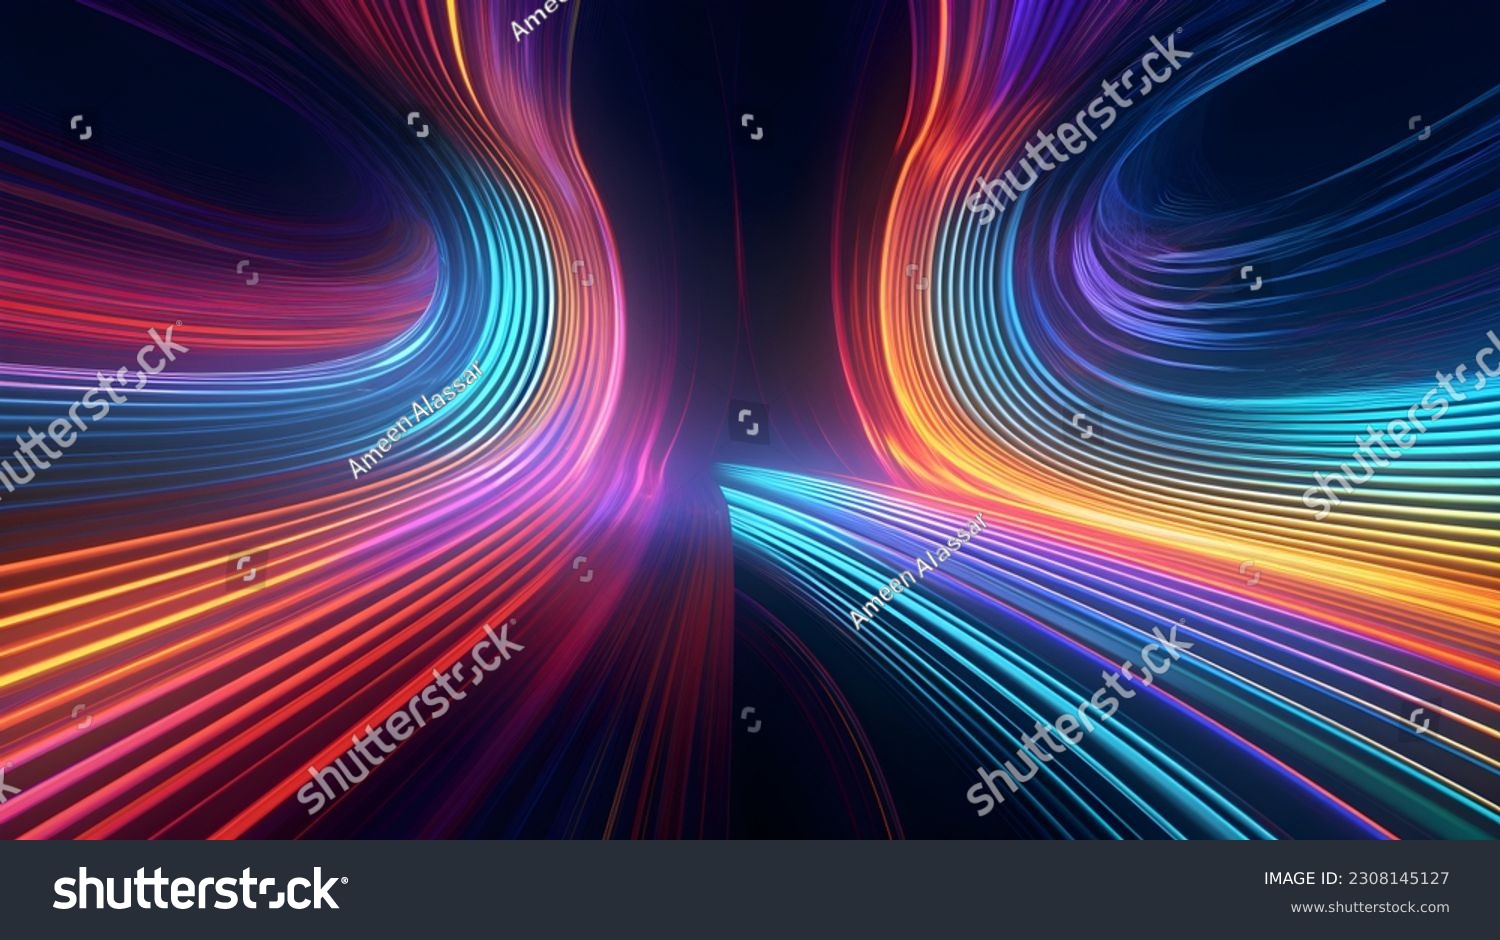 A Mesmerizing 3D Abstract Multicolor Visualization #2308145127